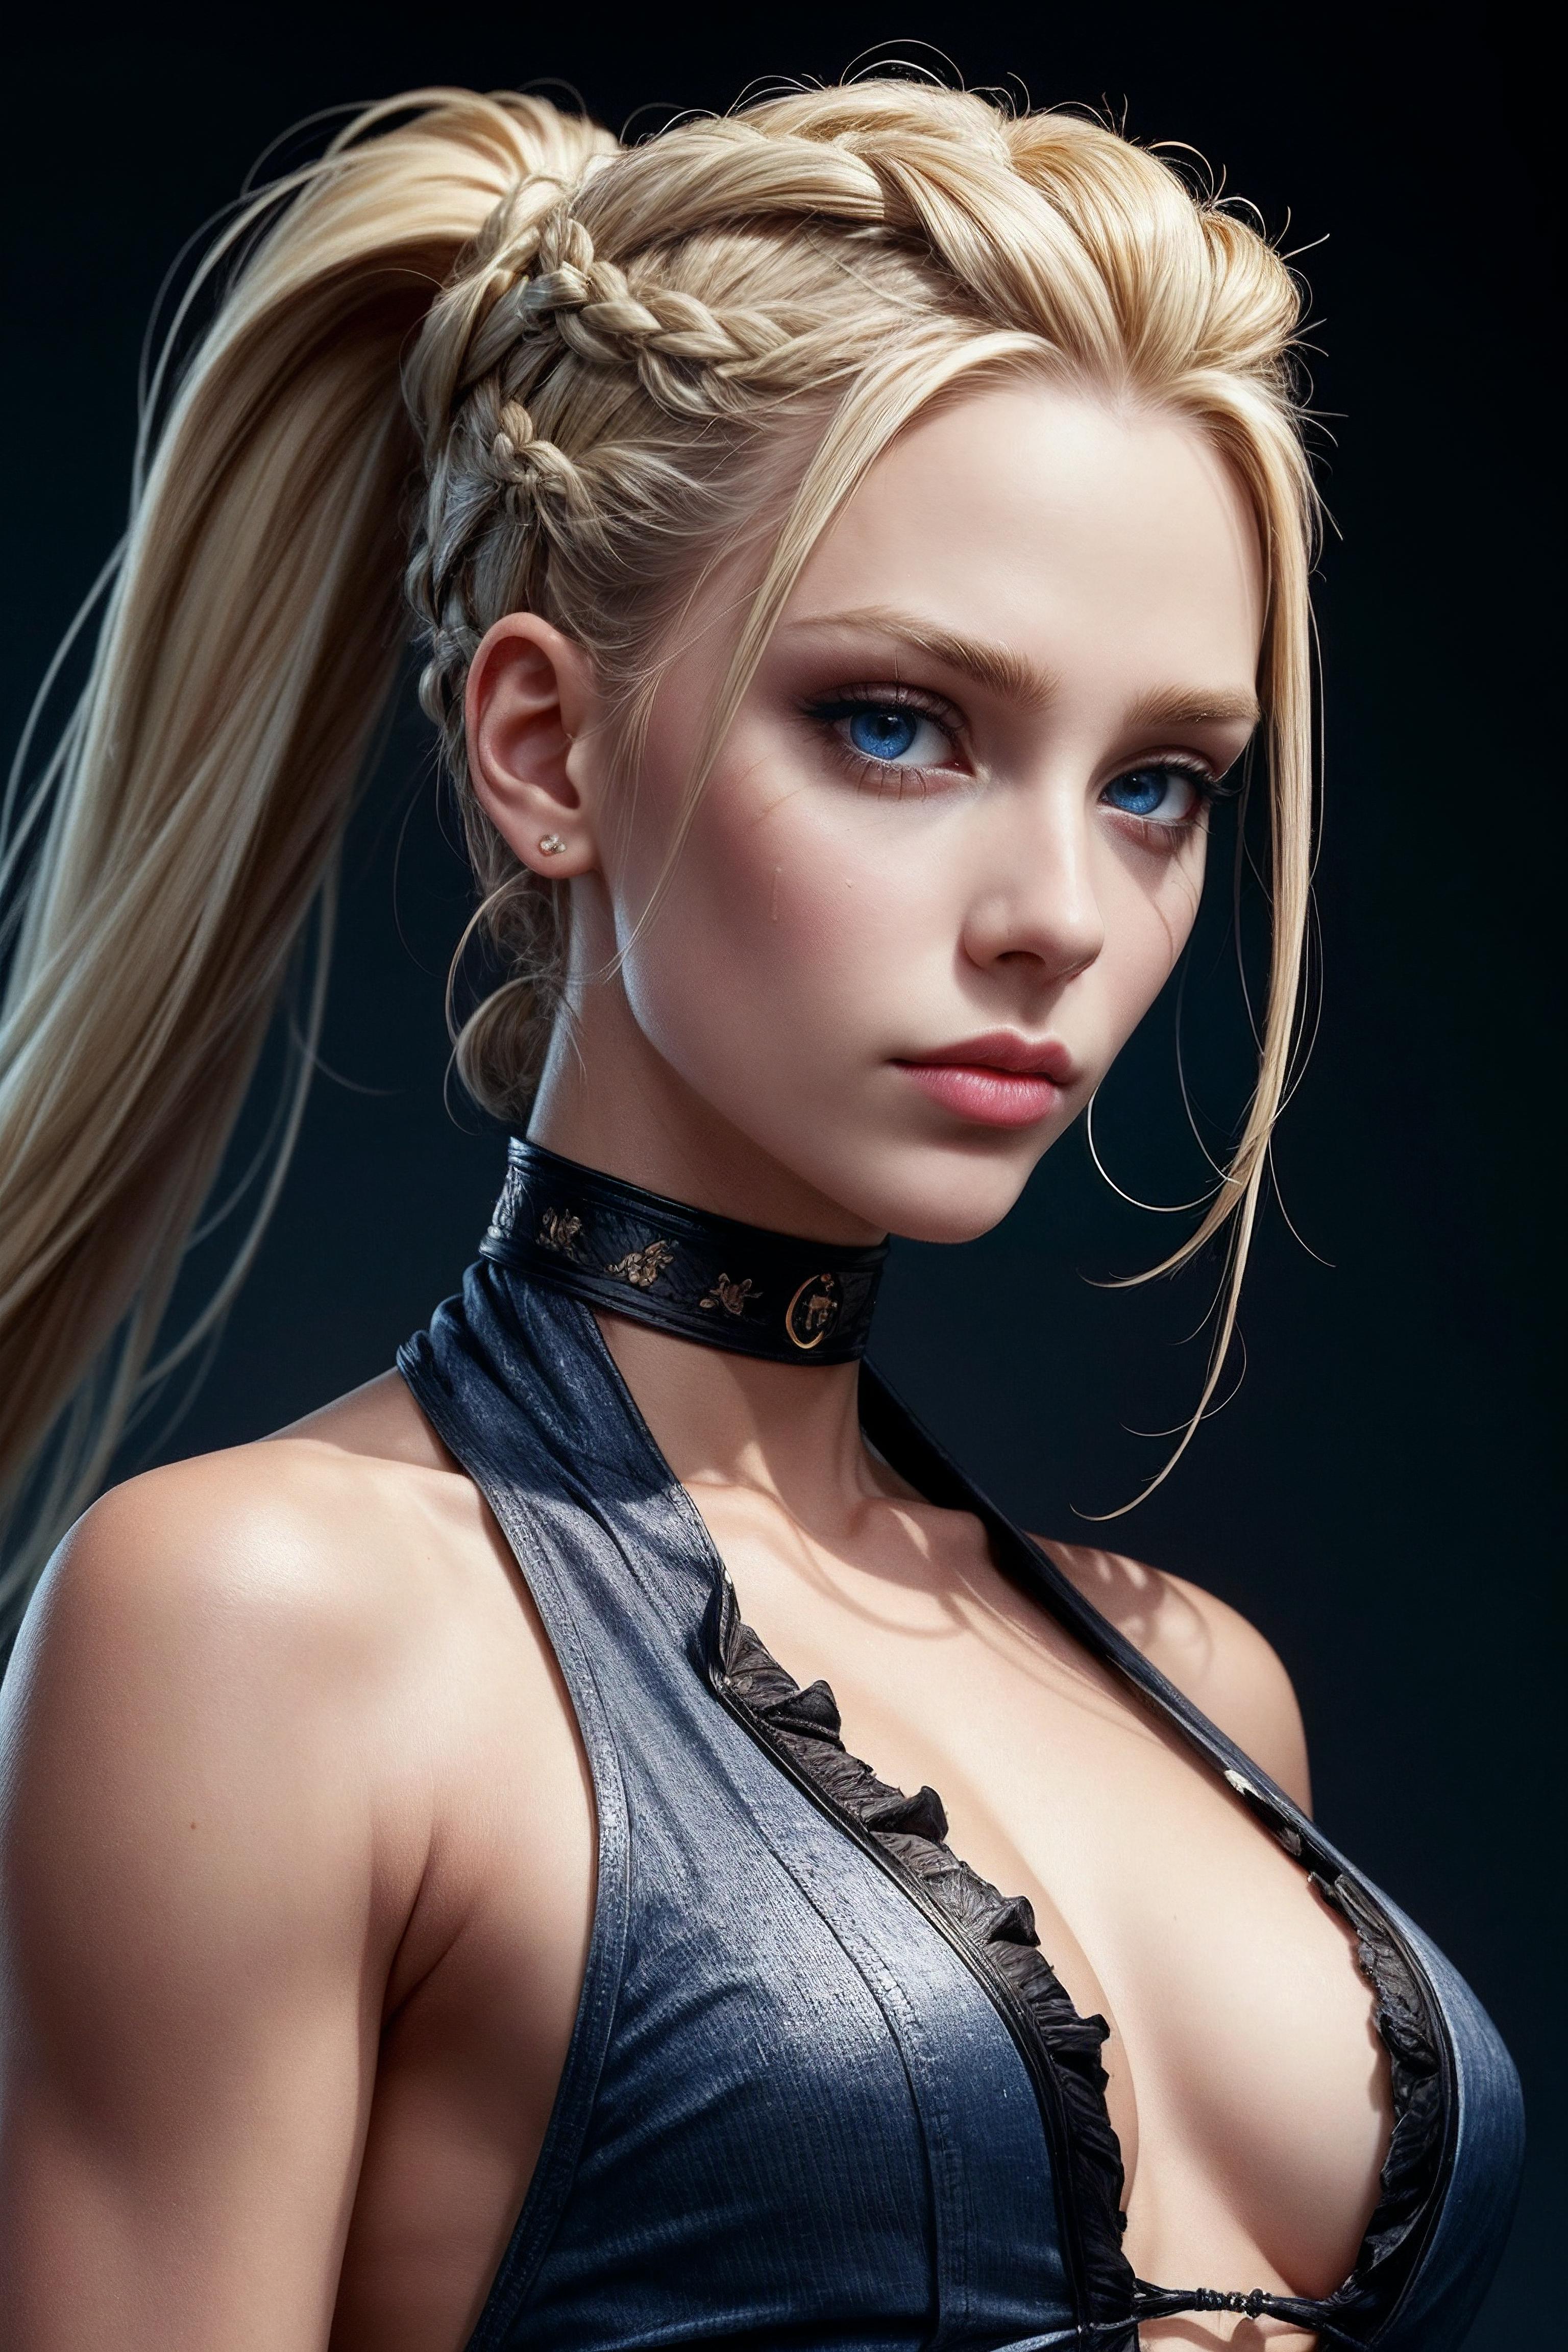 A young blonde woman wearing a corset, leather jacket, and ponytail.